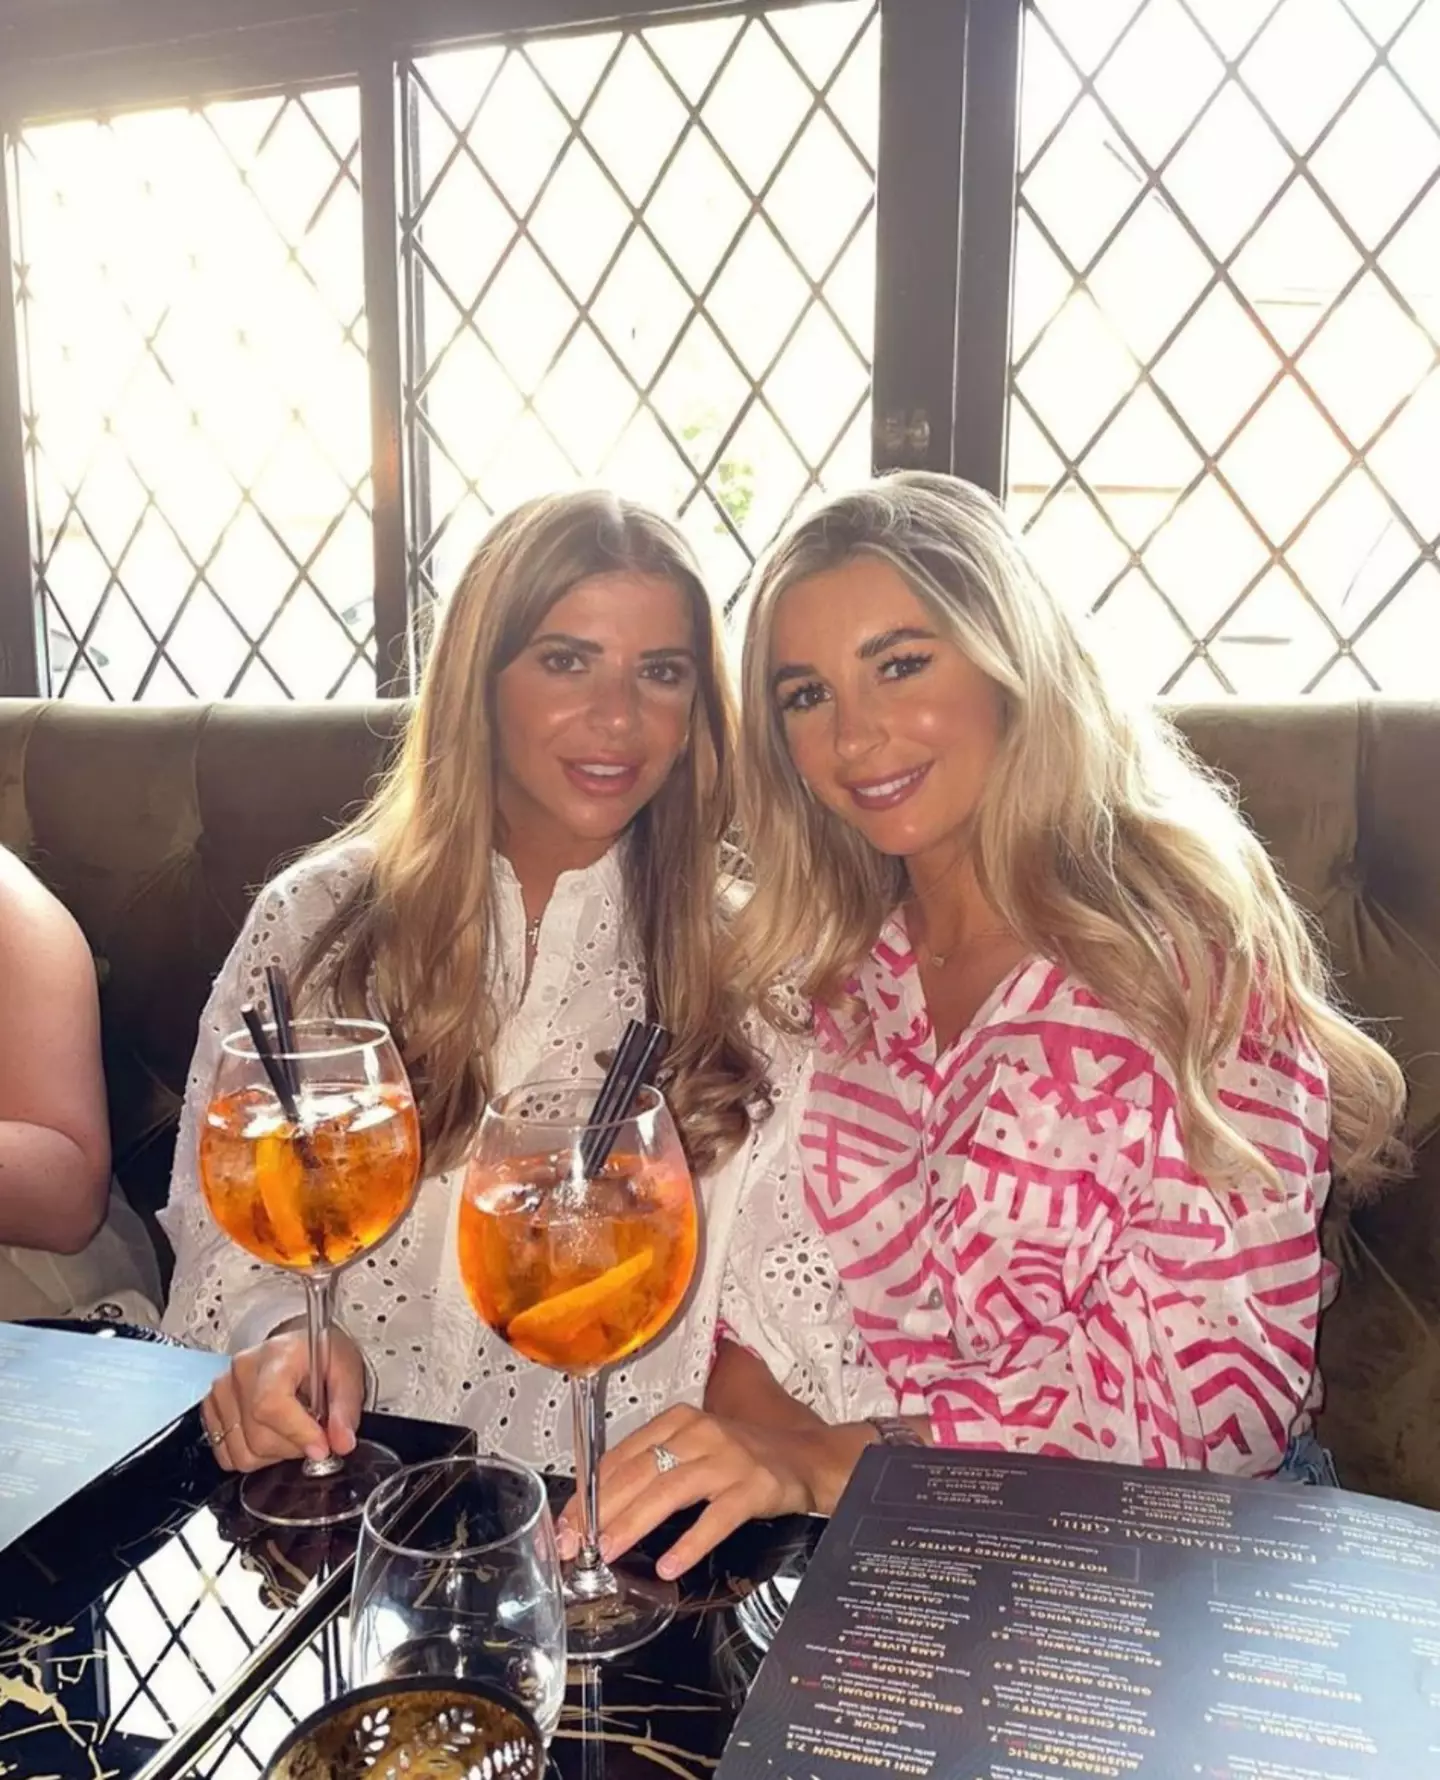 Dani Dyer posted a picture with a friend which drew backlash (